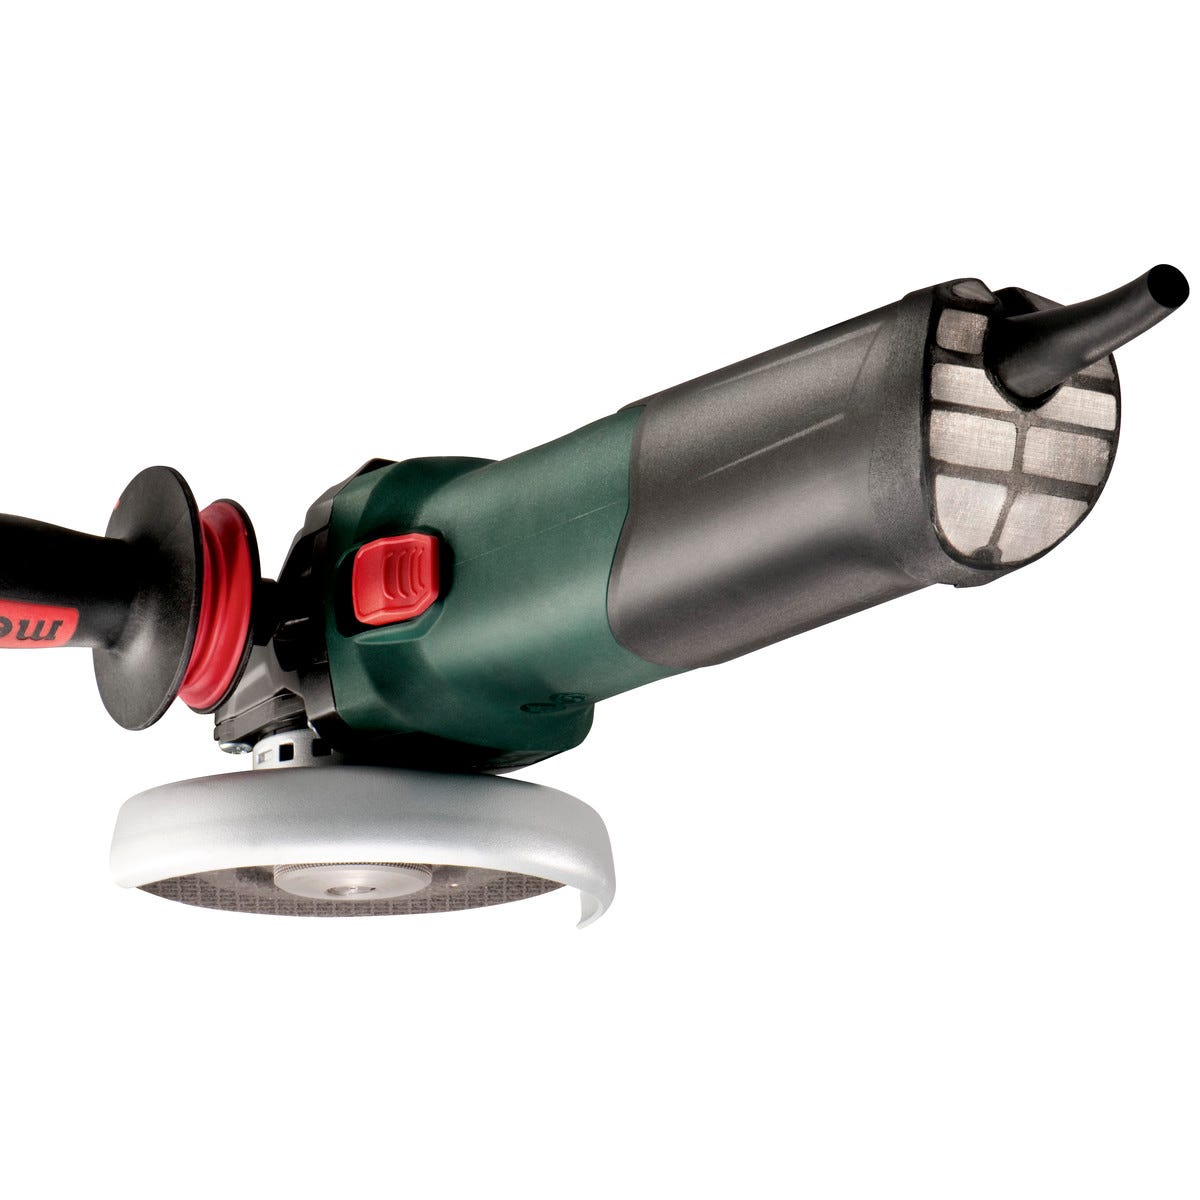 Meuleuse d'angle 1700 W 150 mm 4.3 Nm WEA 17-150 Quick Metabo 7